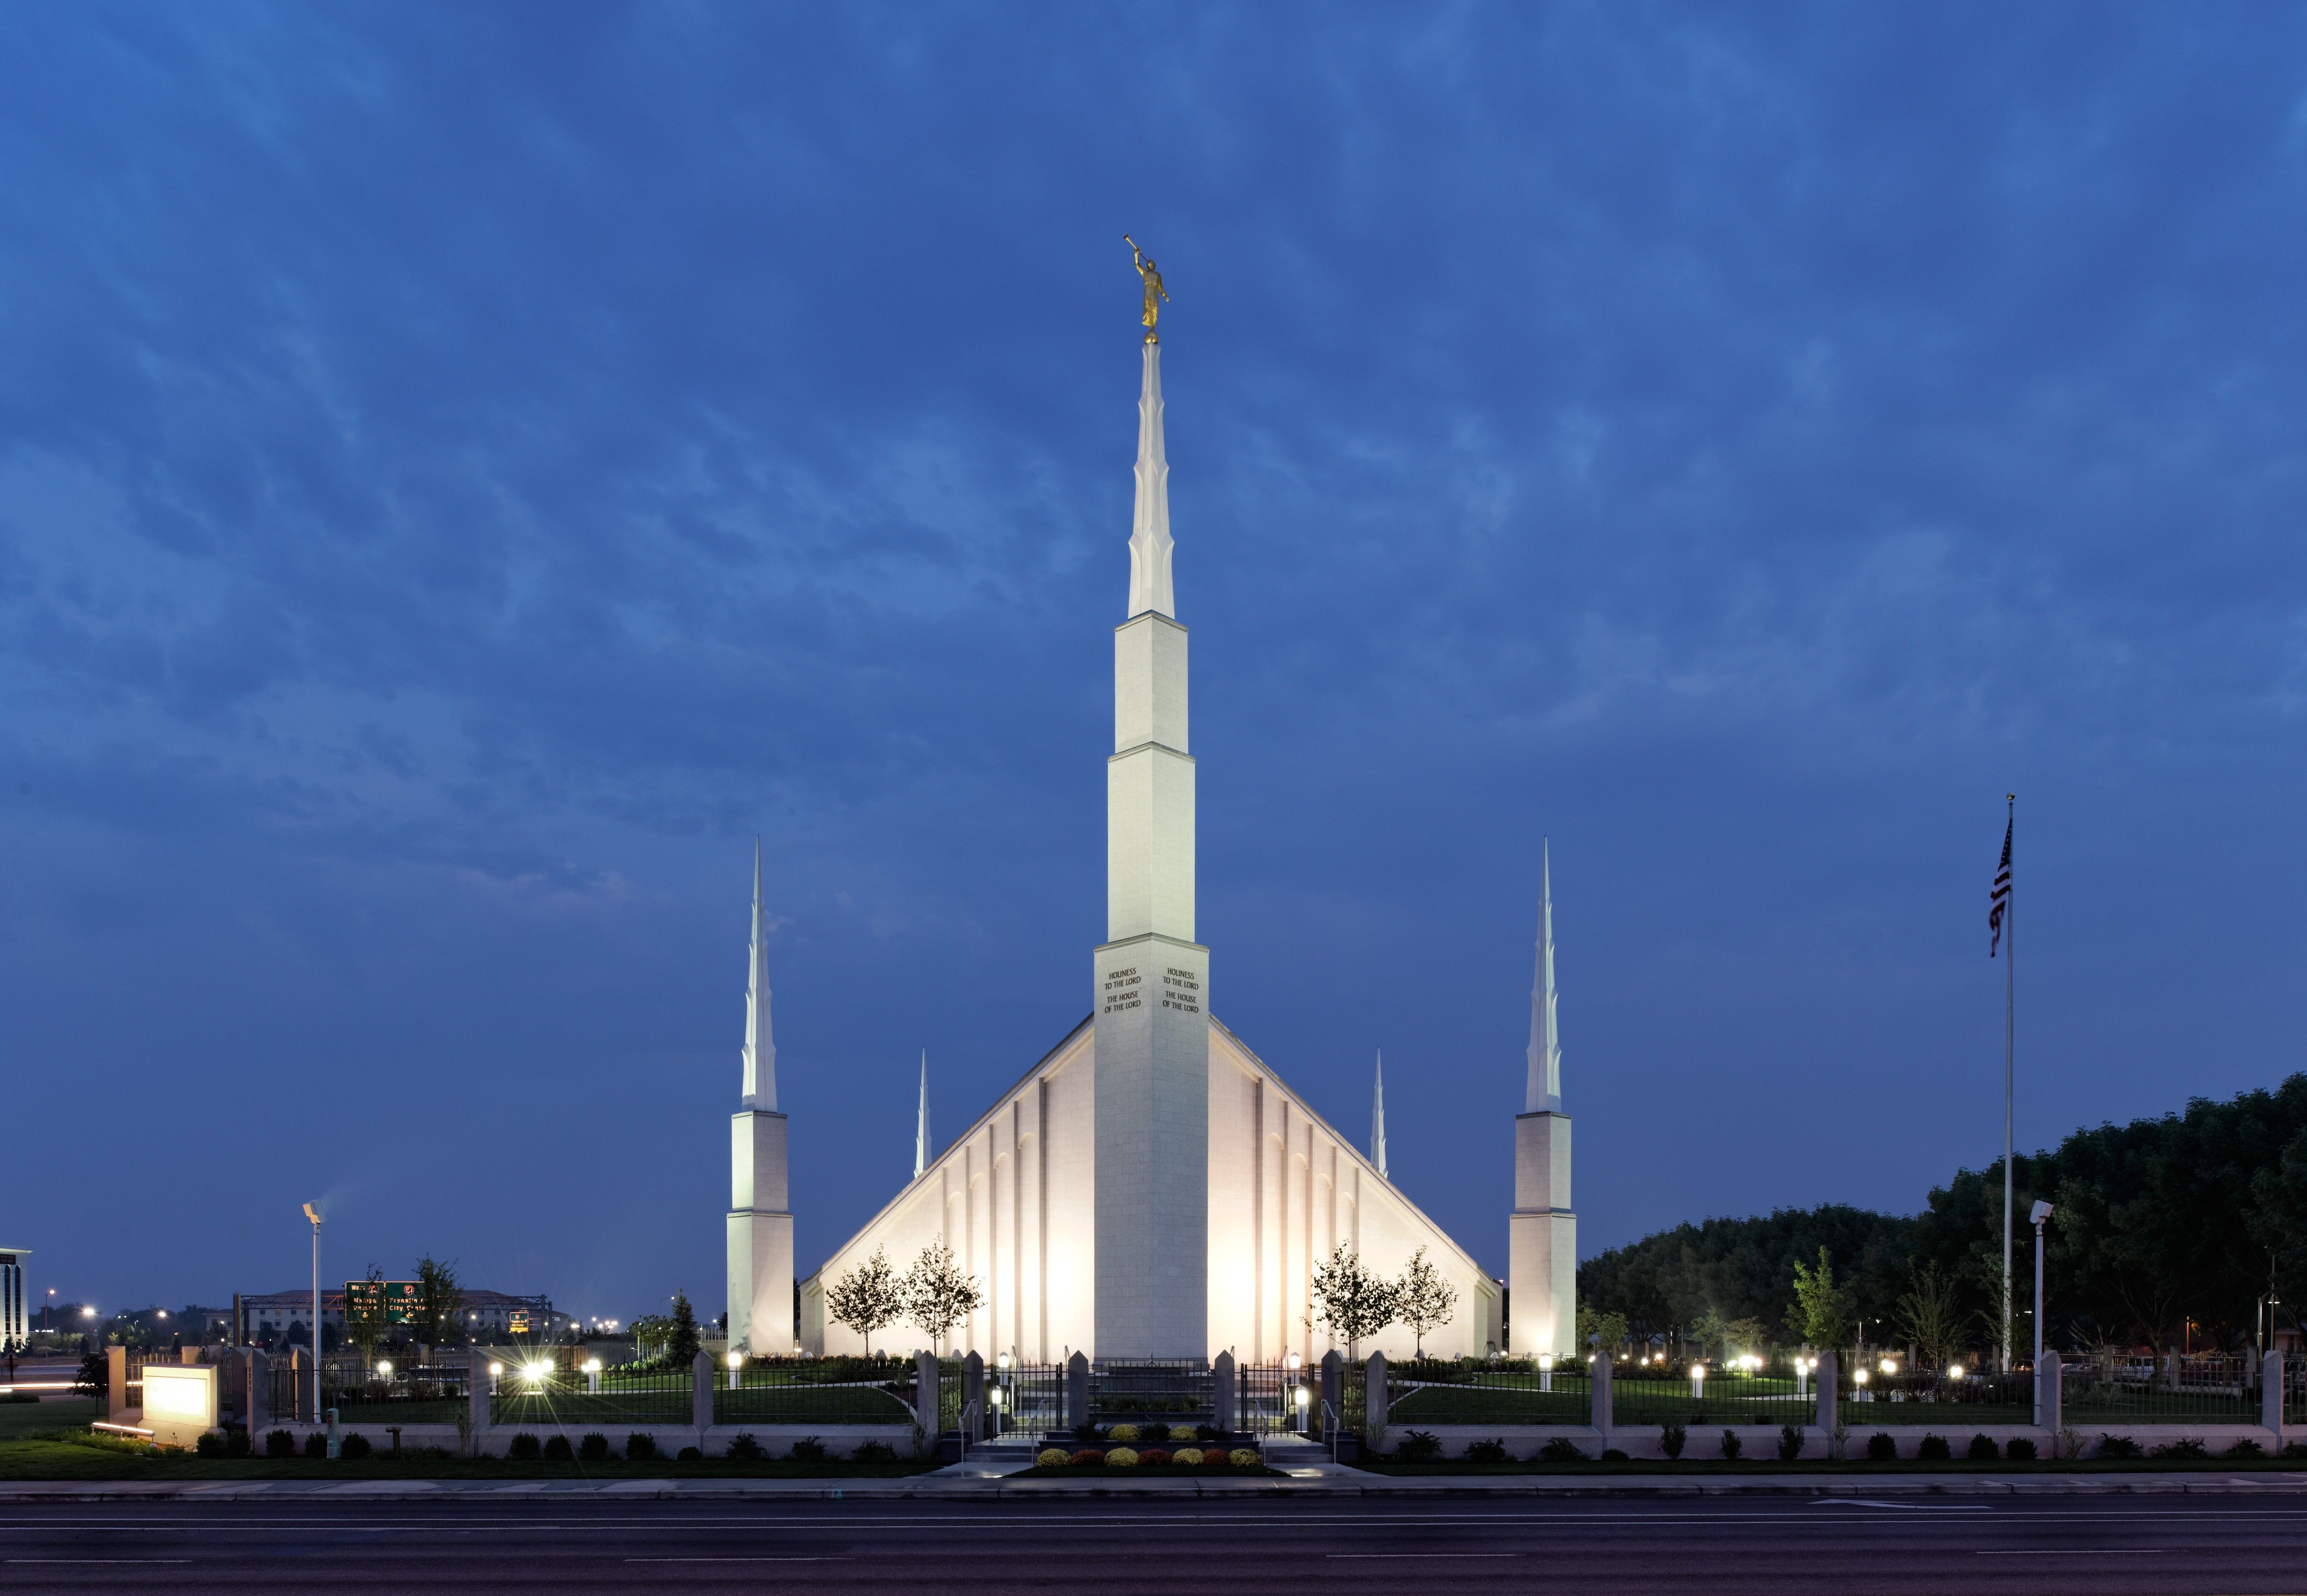 Lights brighten up the front entrance of the Boise Idaho Temple at night.